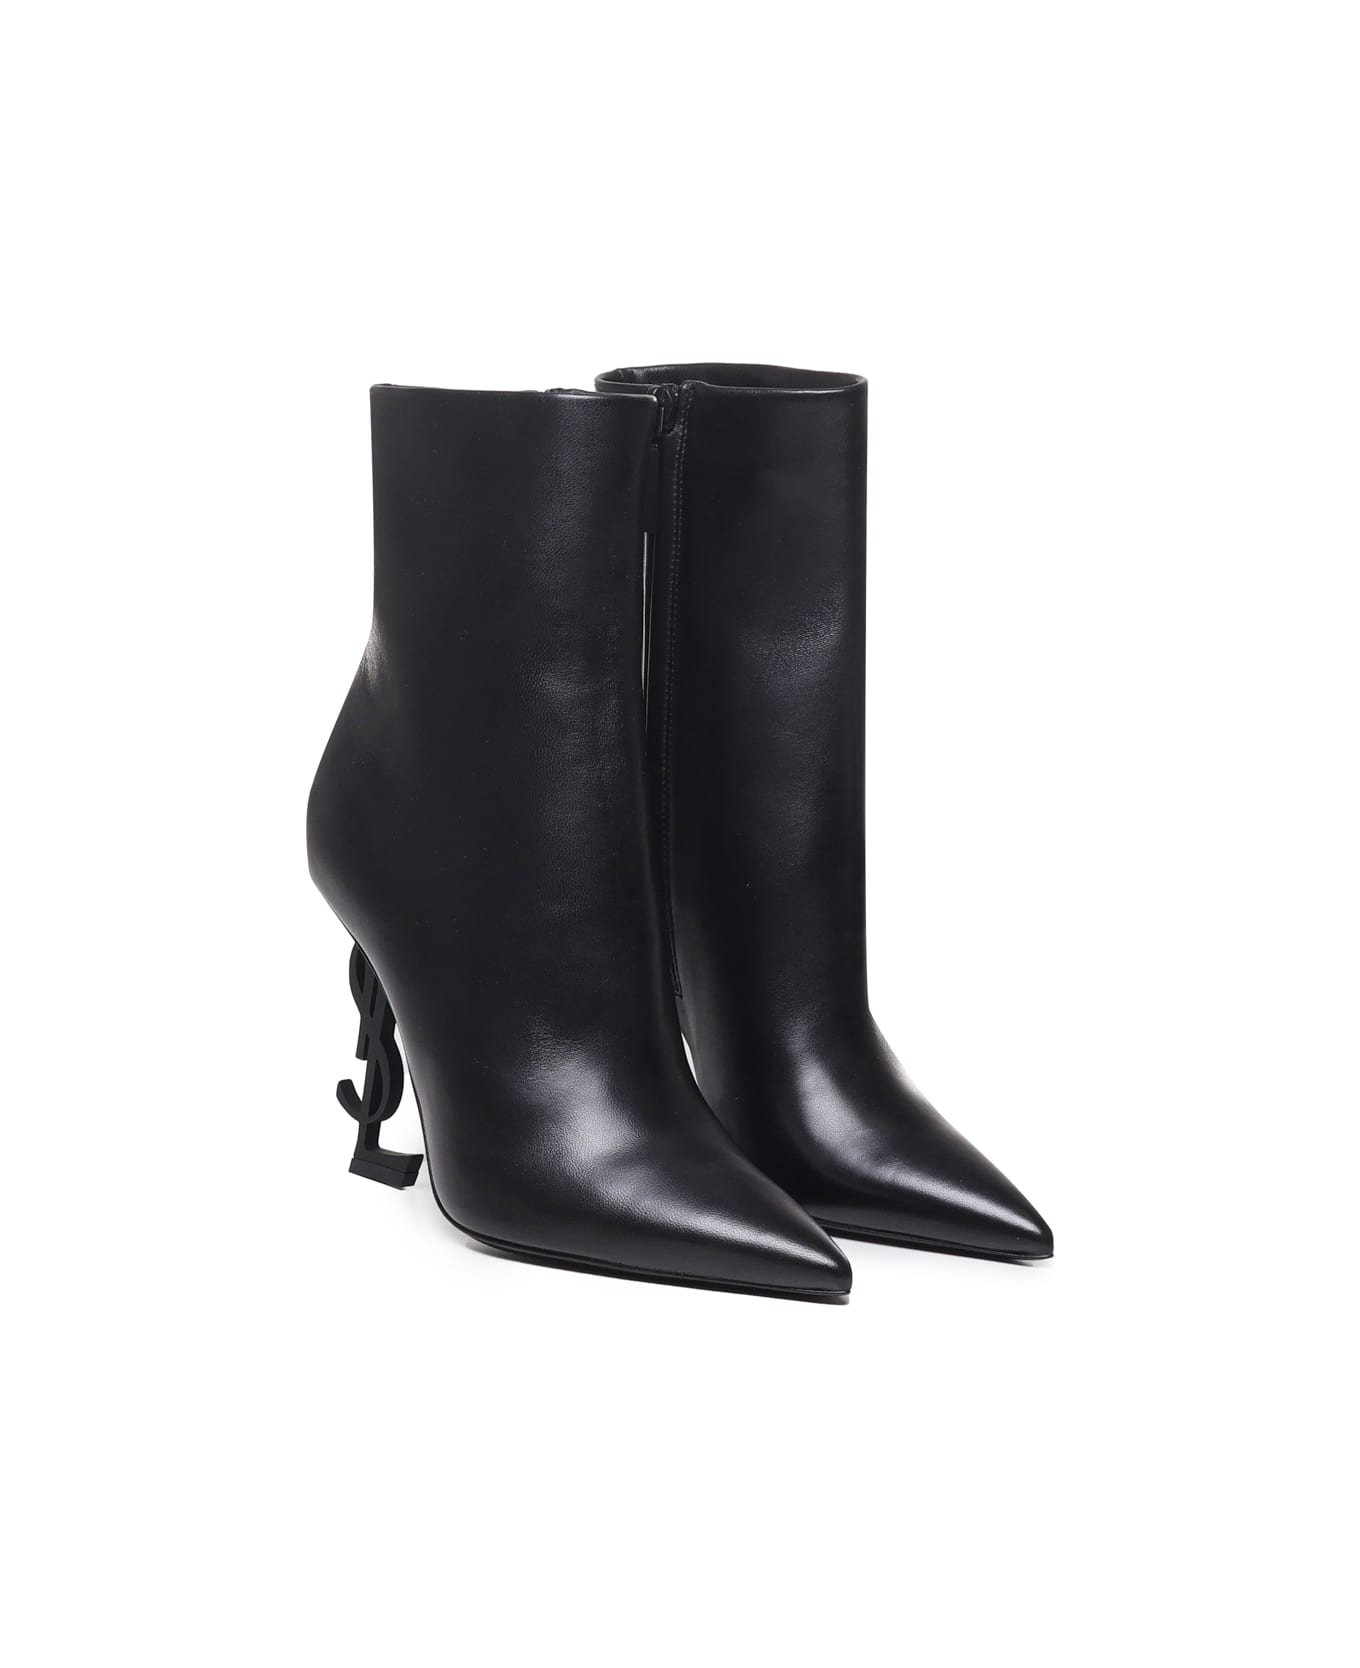 Saint Laurent Opyum Ankle Boots In Calfskin - Black ブーツ